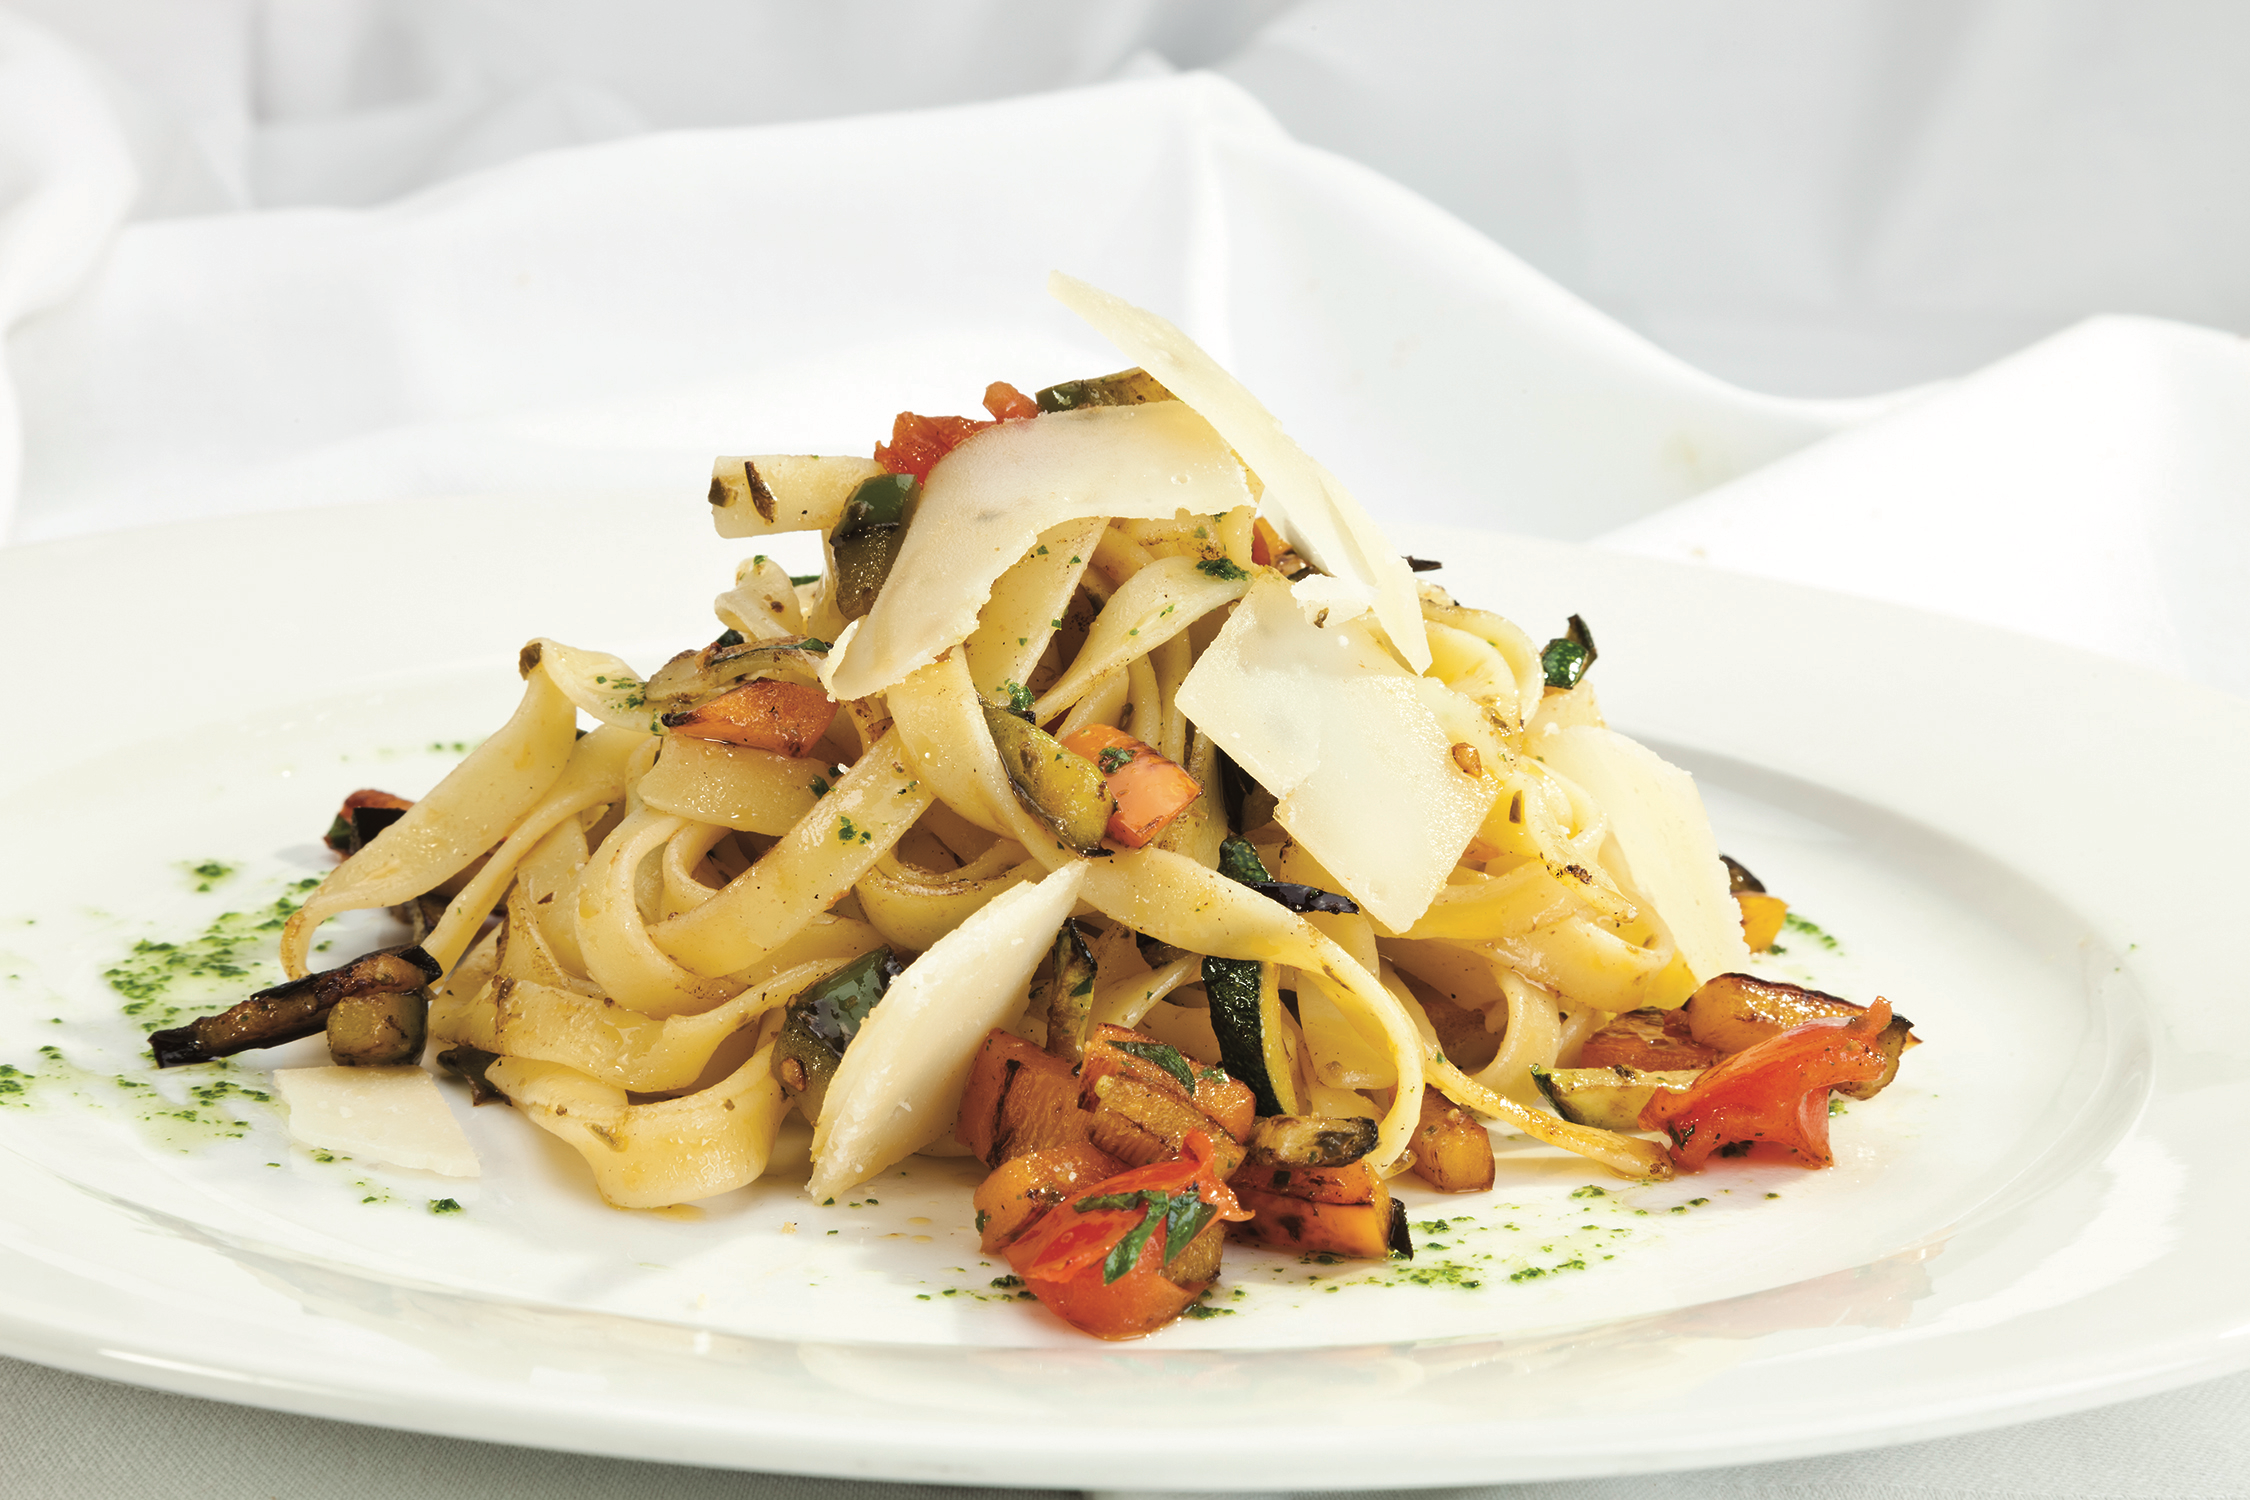 Pappardelle with Garden Vegetables